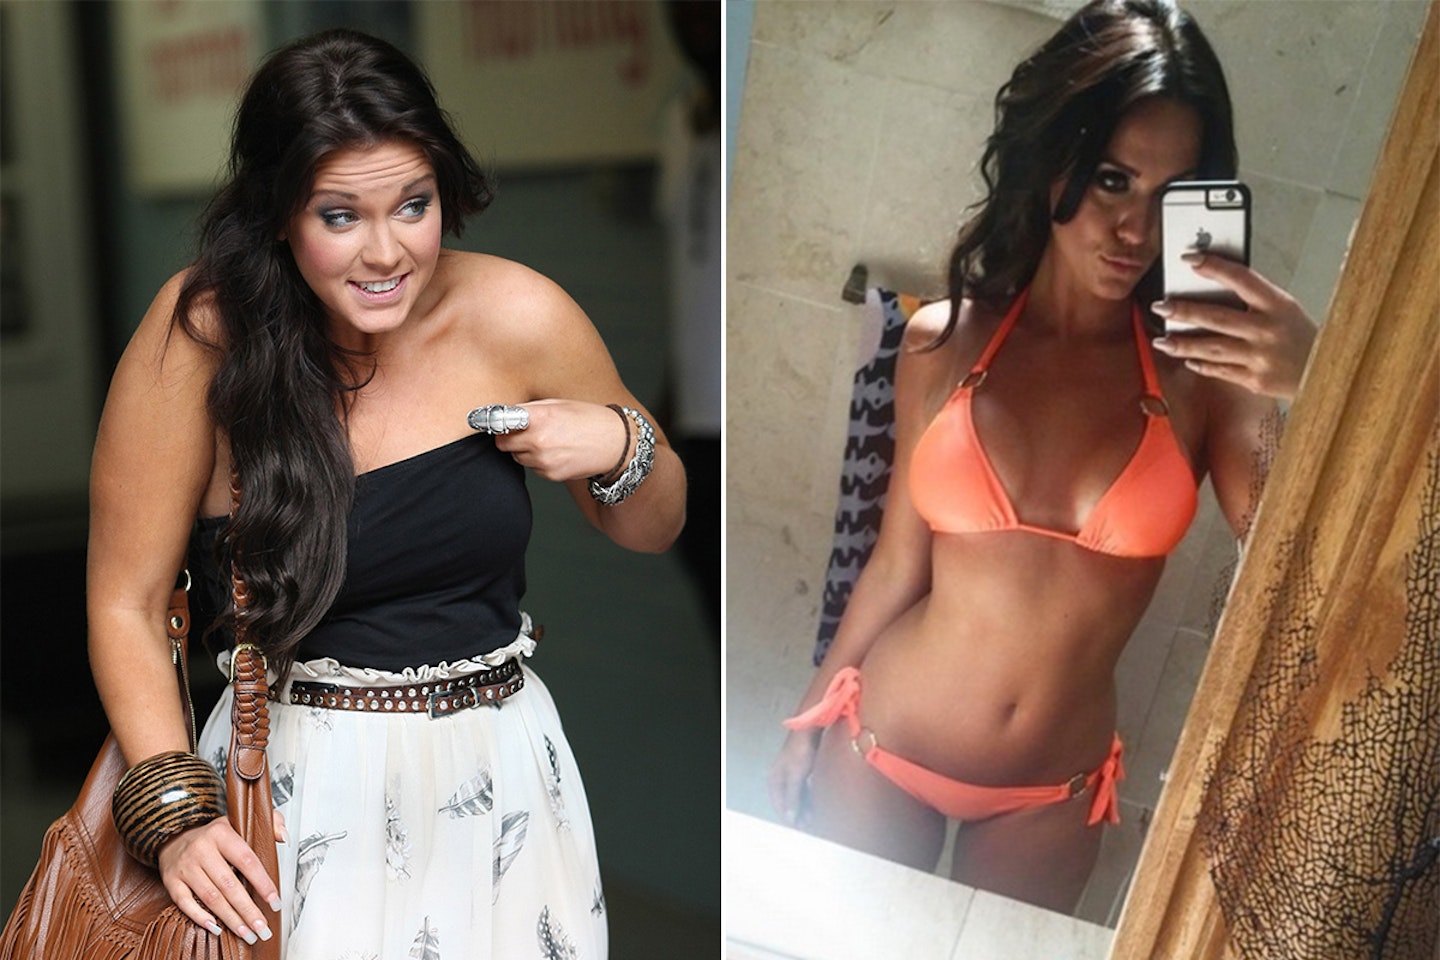 vicky pattison before and after